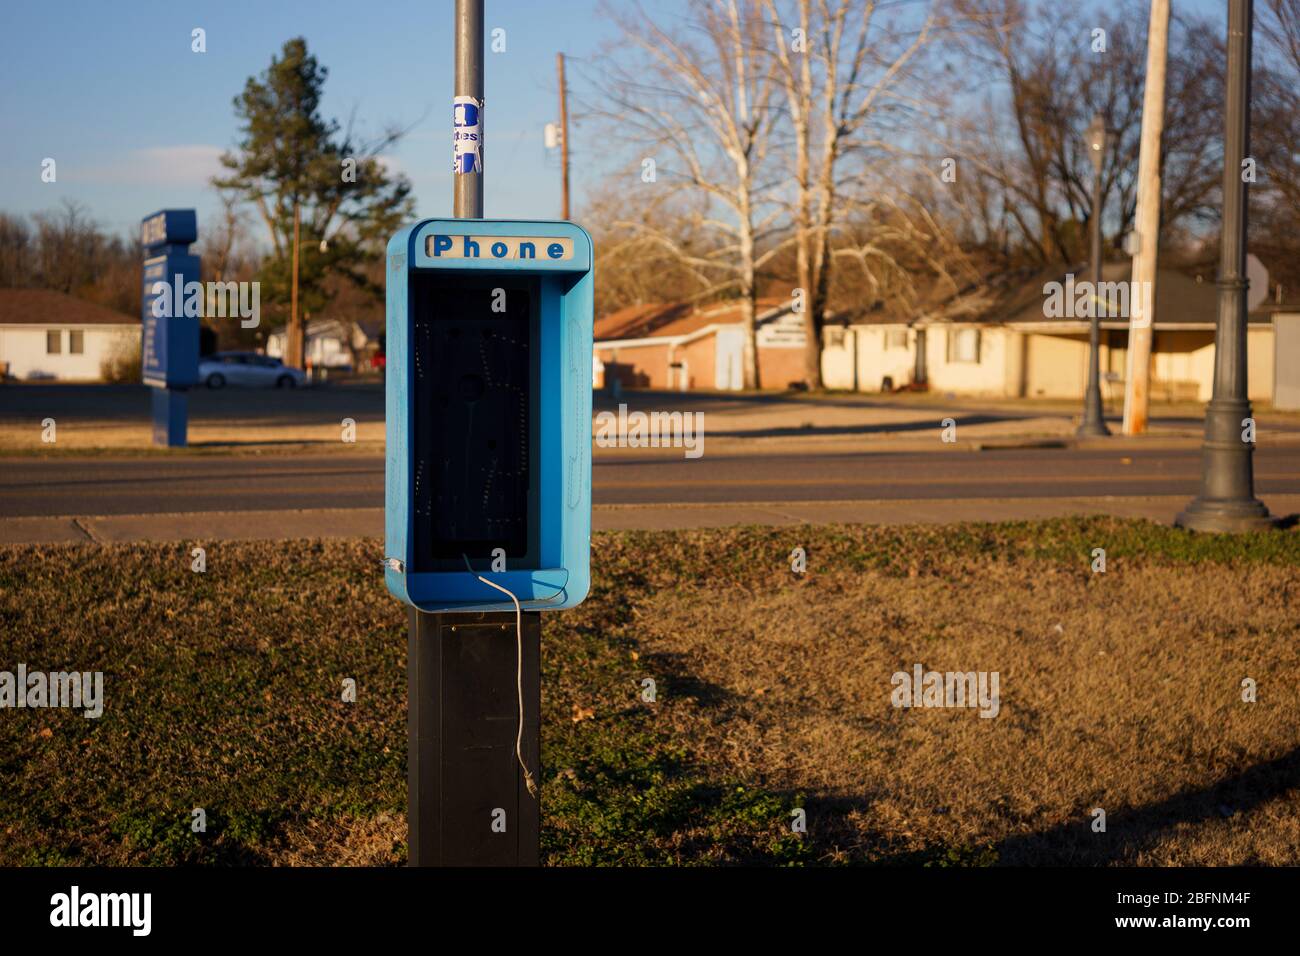 An old and damaged non working pay phone booth in Danville Arkansas, Nov 2015. Stock Photo